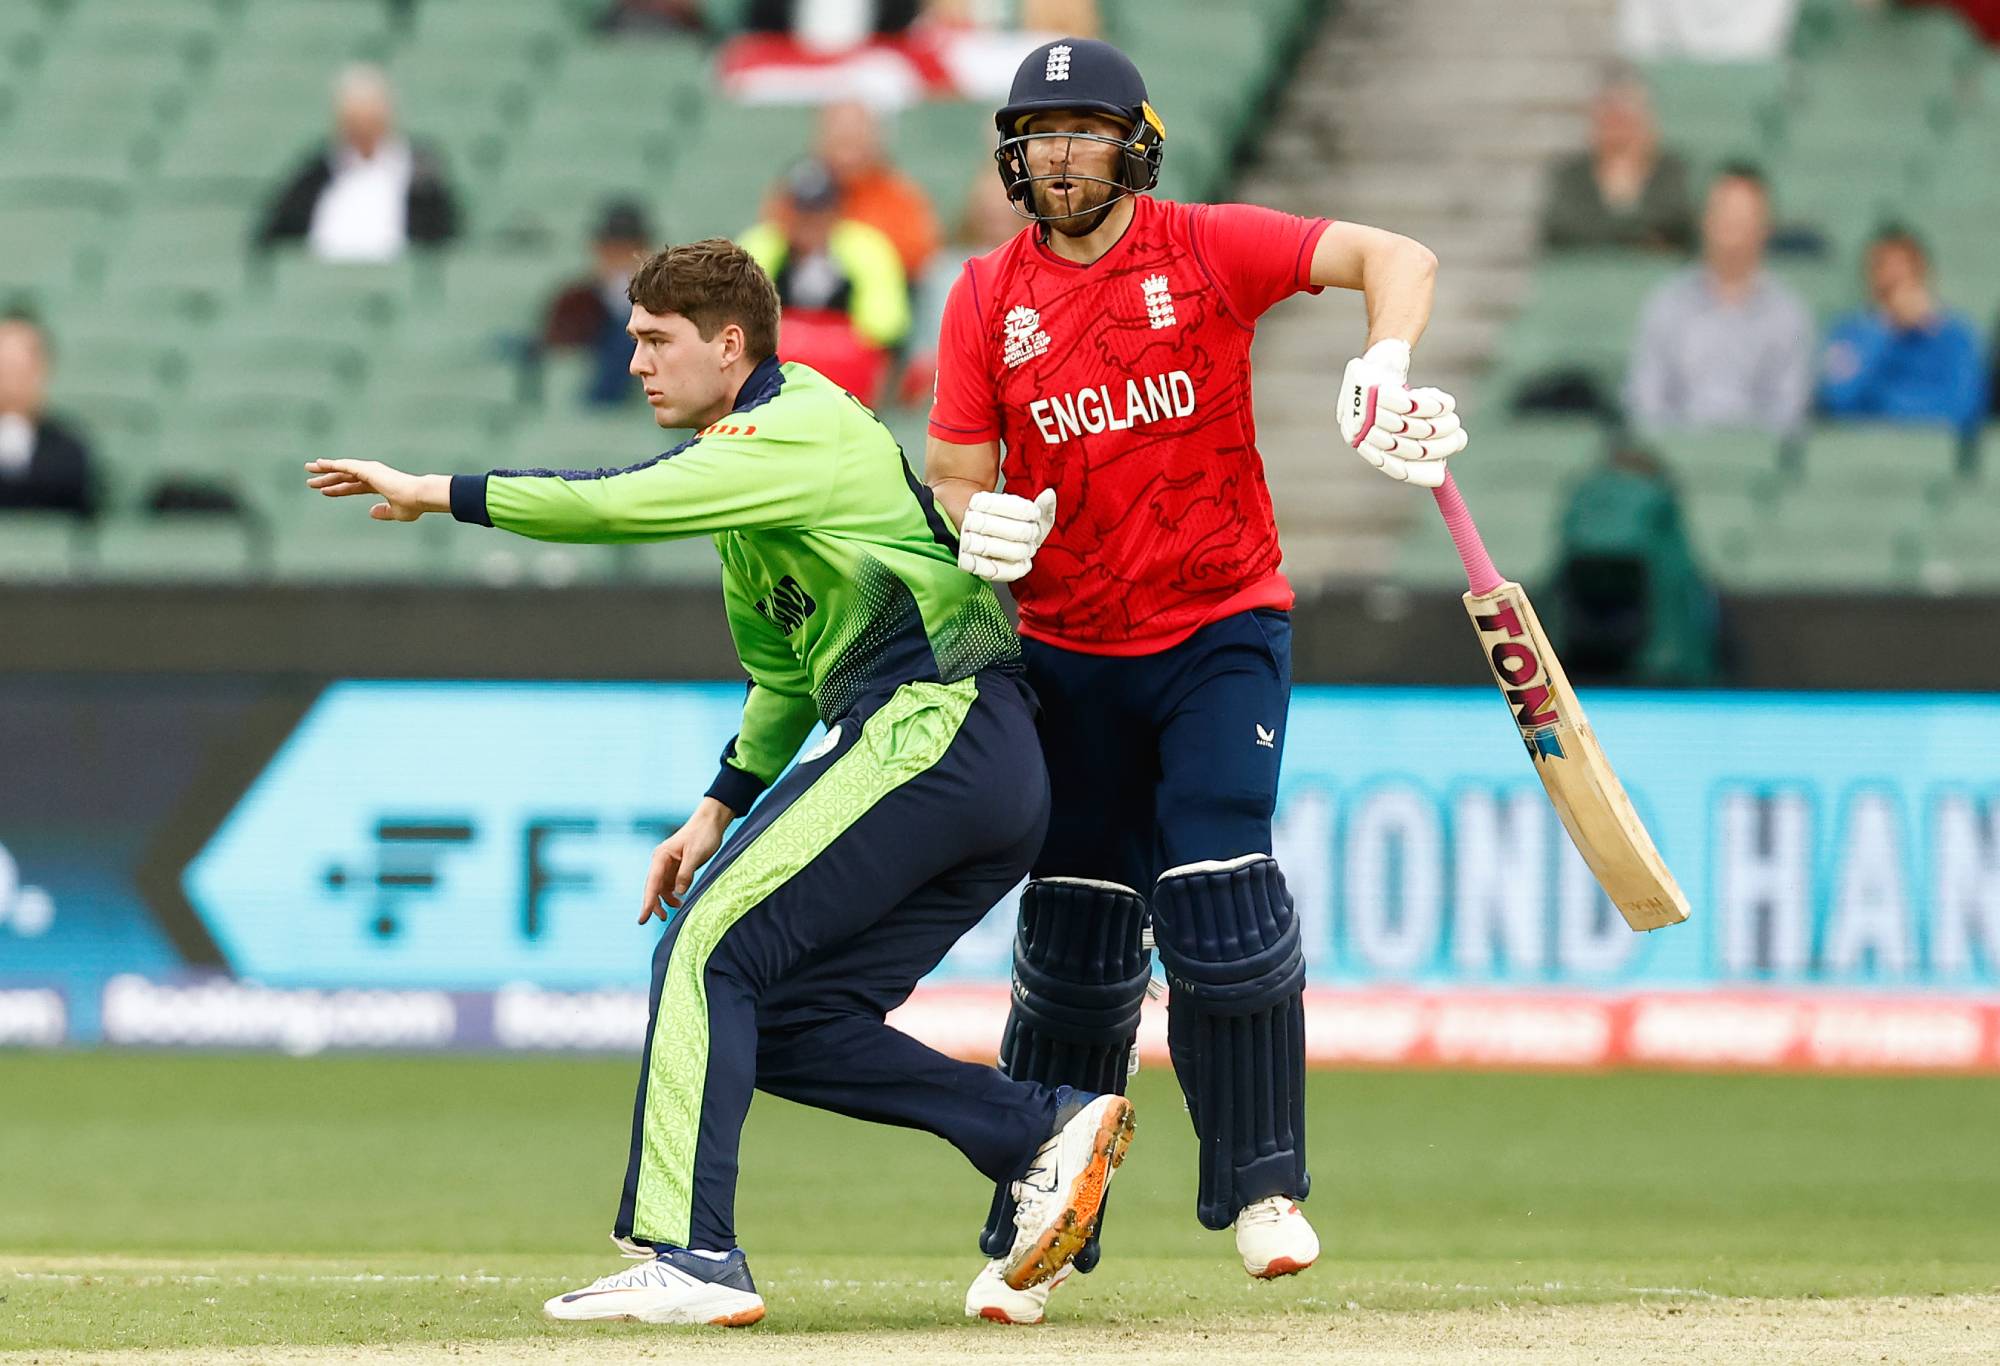 MELBOURNE, AUSTRALIA - OCTOBER 26: Gareth Delany of Ireland and Dawid Malan of England collide during the ICC Men's T20 World Cup match between England and Ireland at Melbourne Cricket Ground on October 26, 2022 in Melbourne, Australia. (Photo by Darrian Traynor/Getty Images)